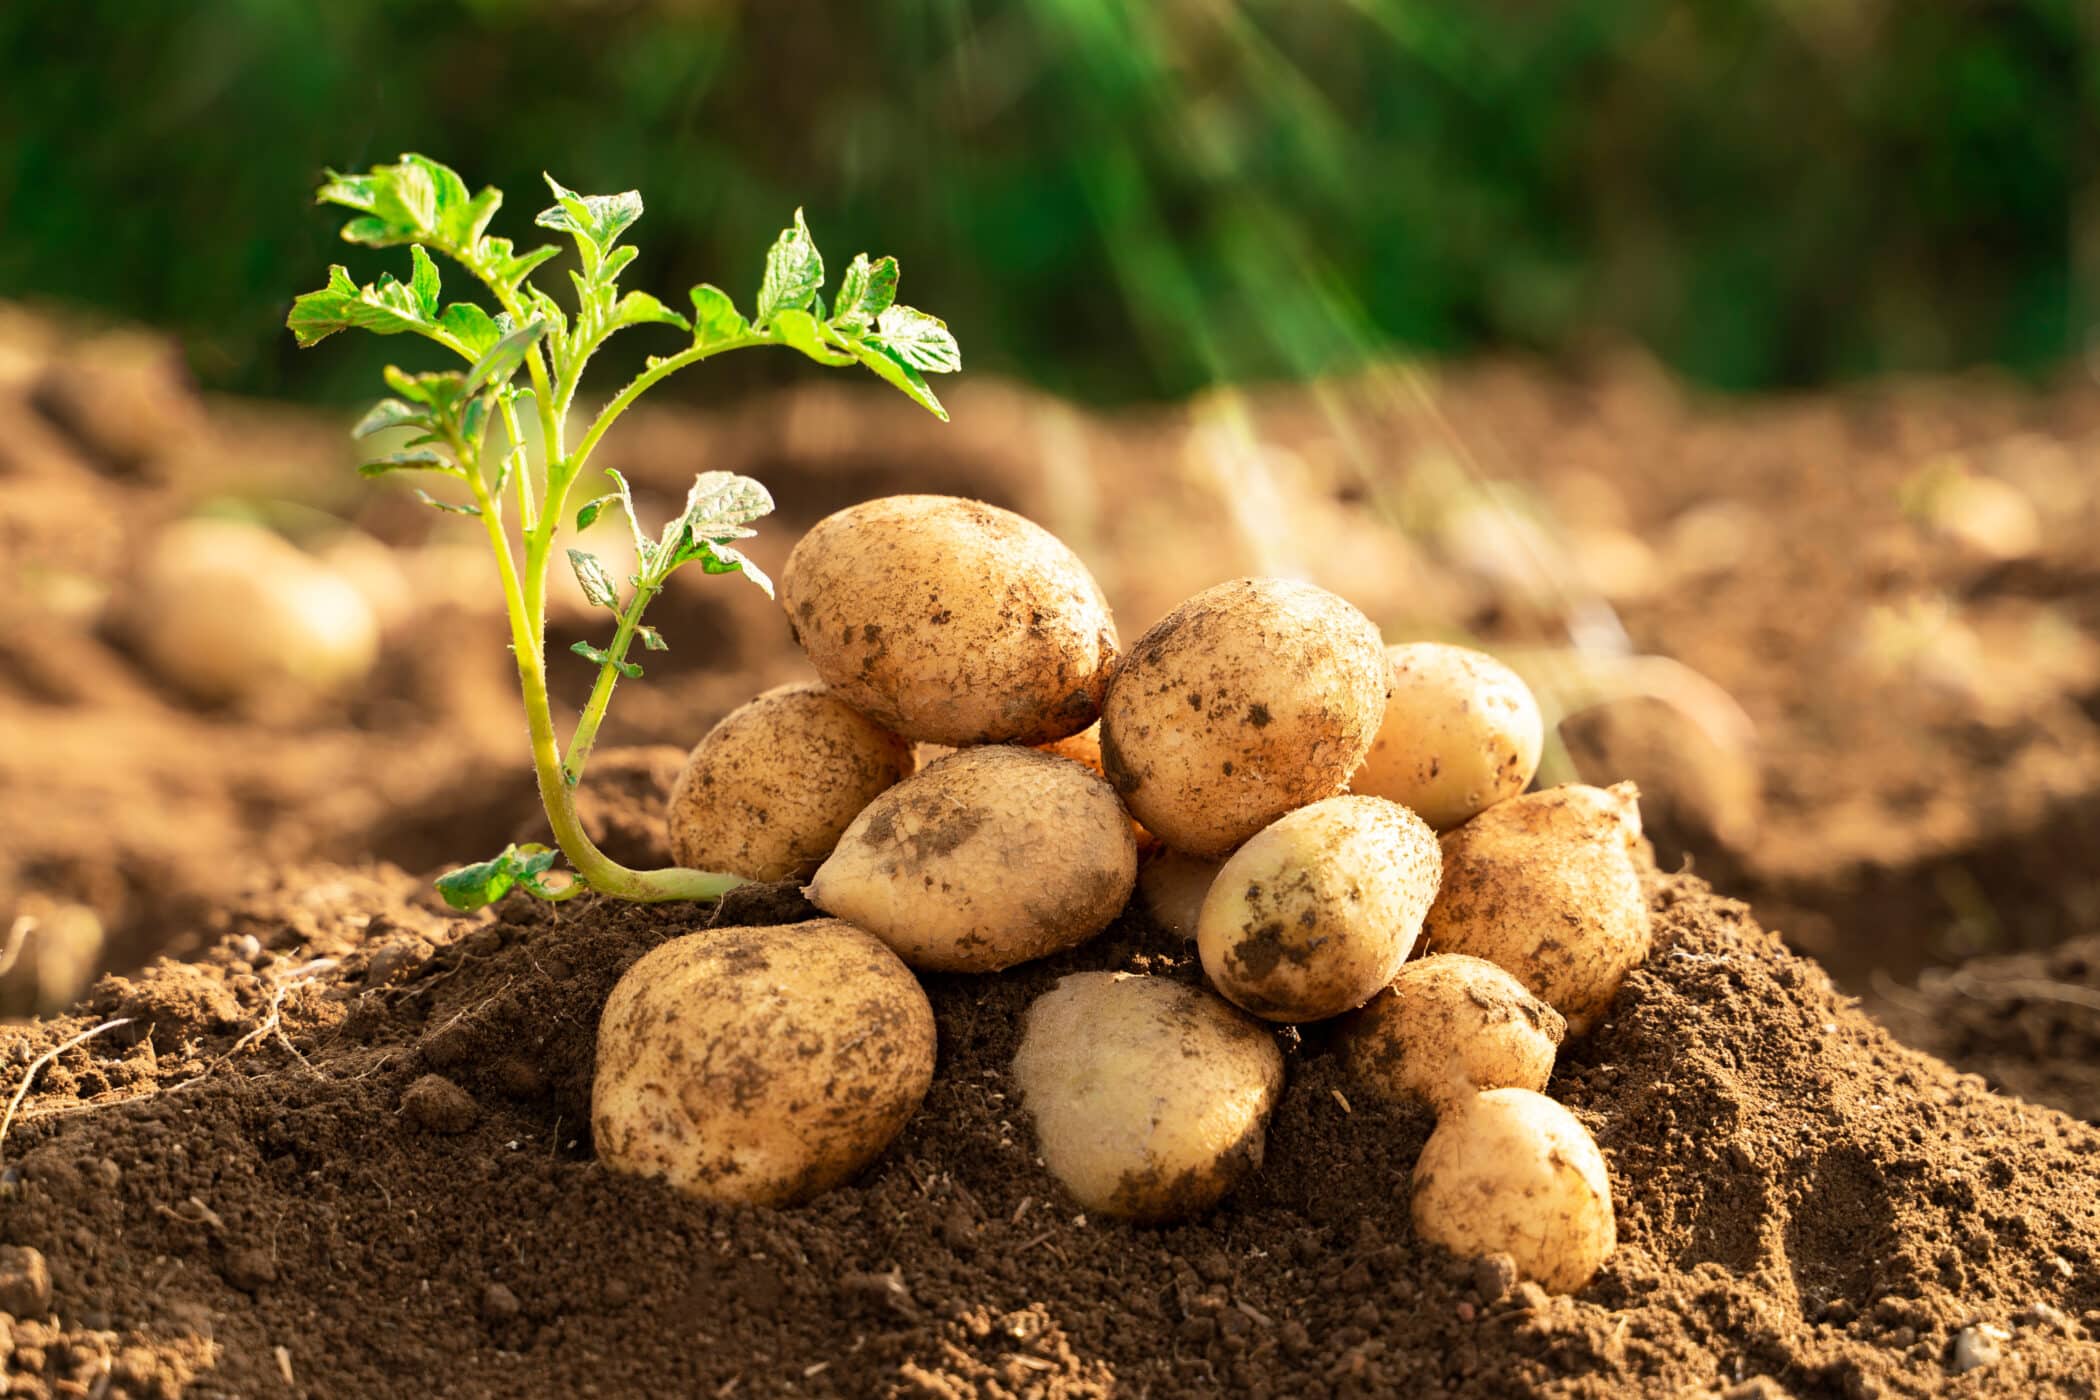 Do You Plant Potatoes With The Eyes Up Or Down?